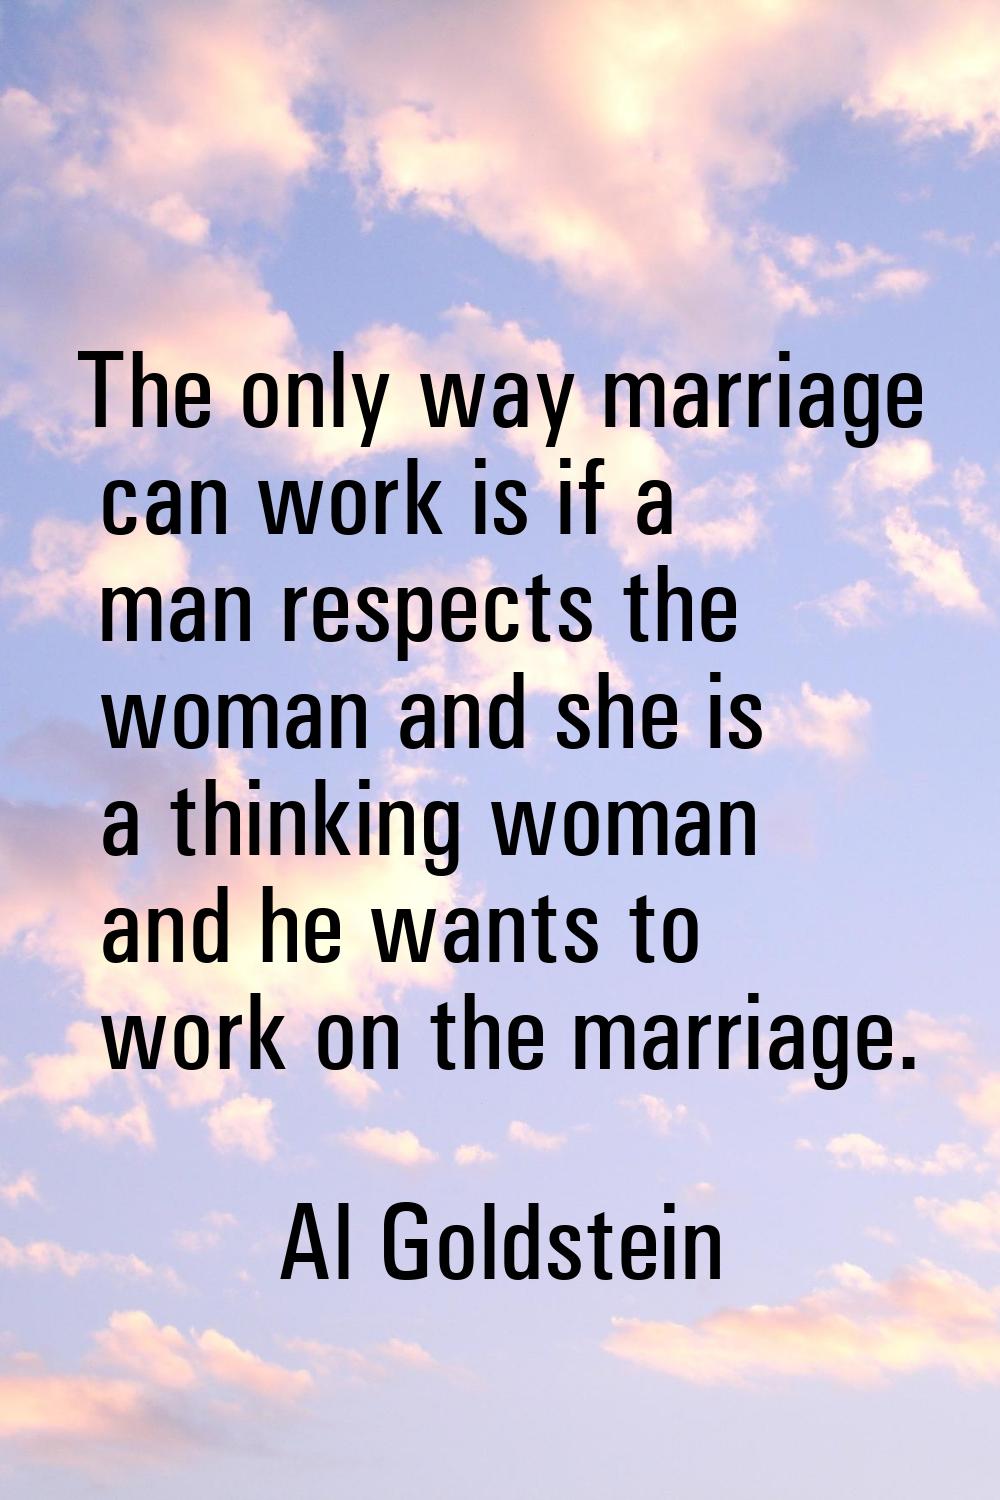 The only way marriage can work is if a man respects the woman and she is a thinking woman and he wa